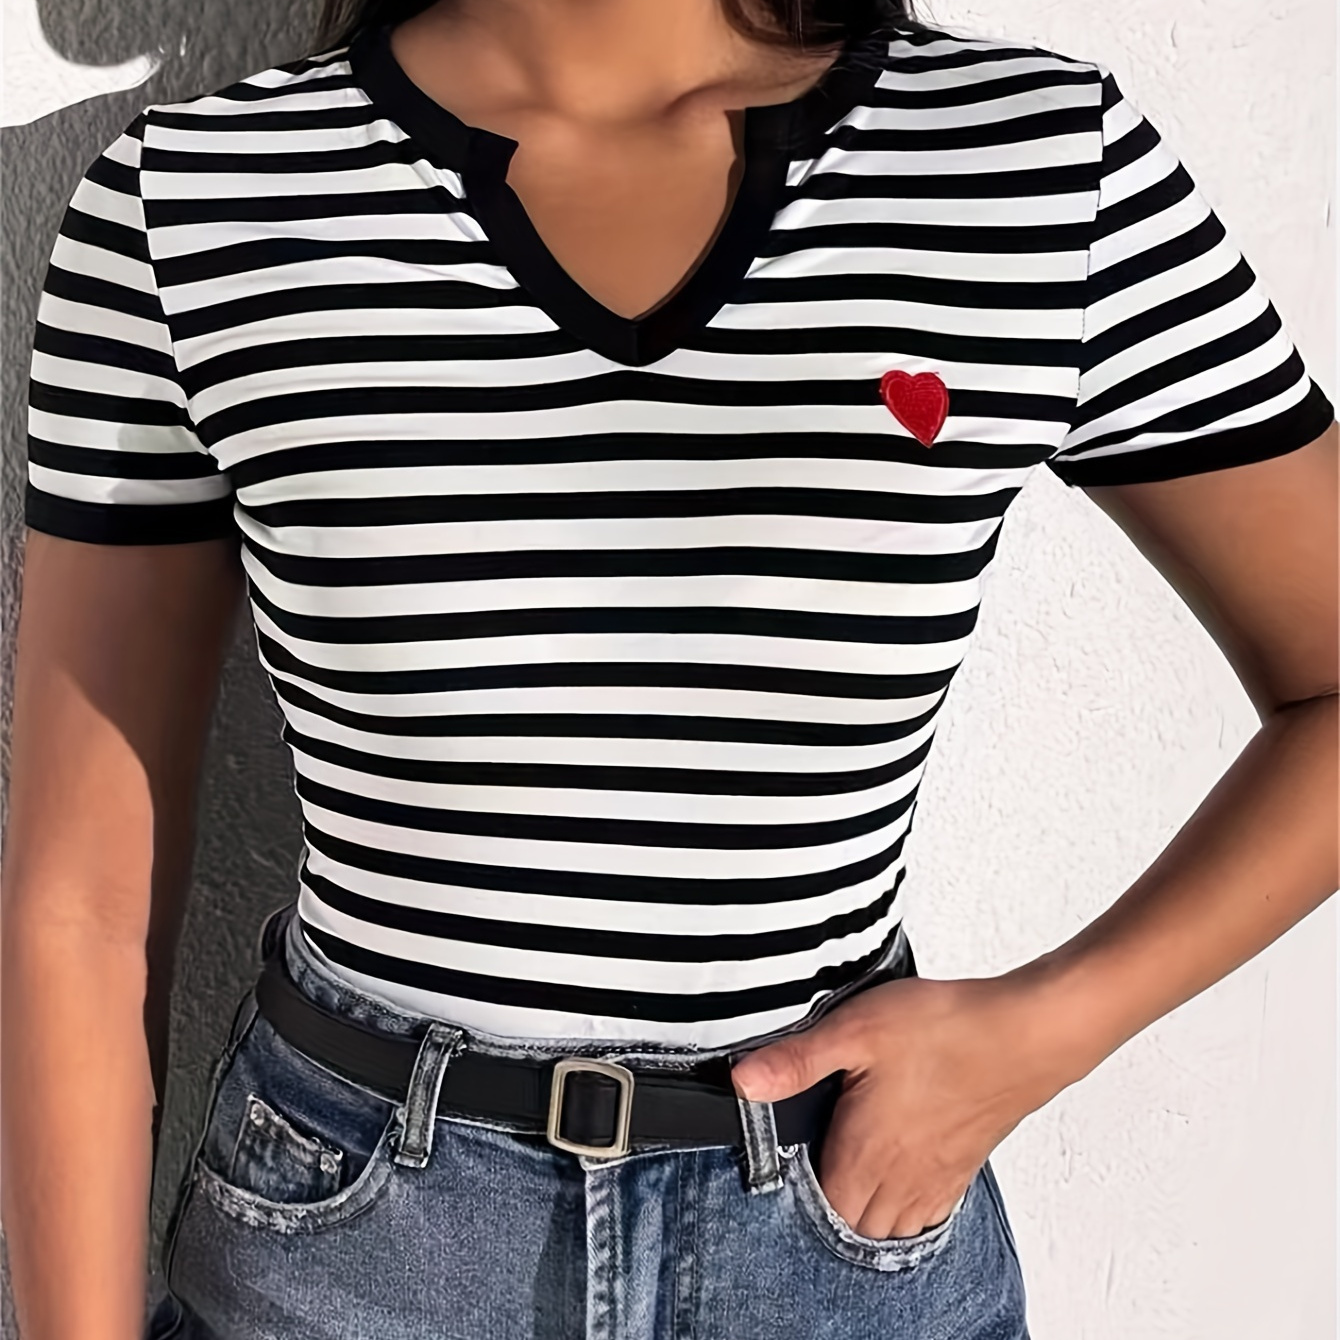 

Heart & Striped Print Slim T-shirt, Casual Notched Neck Short Sleeve Top, Women's Clothing